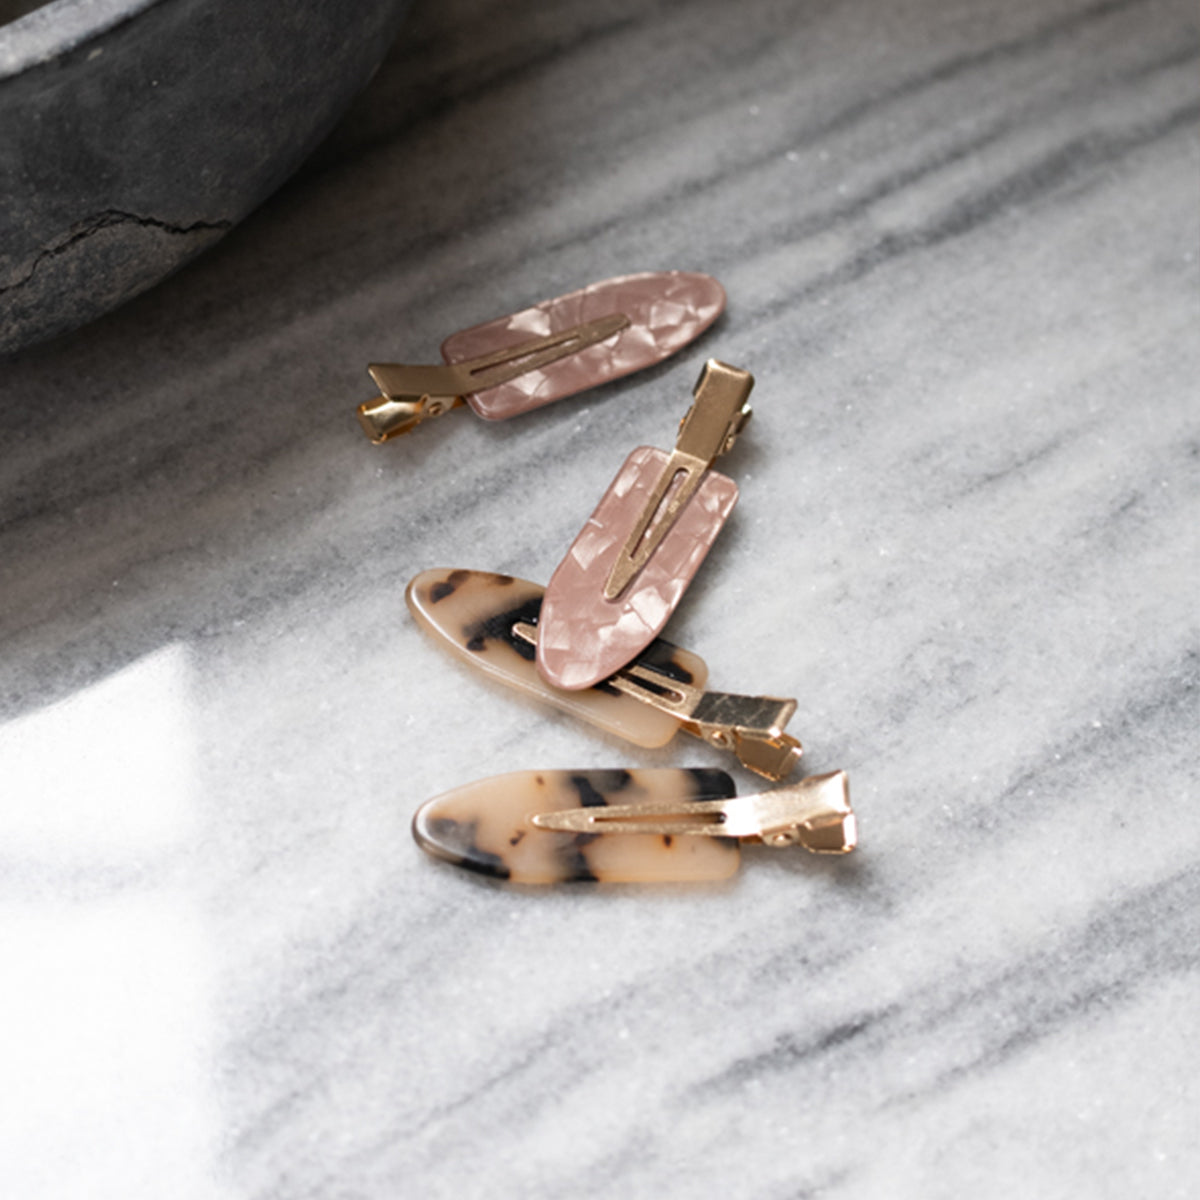 No Crease Hair Clips | Lifestyle Image | Uncommon Beauty